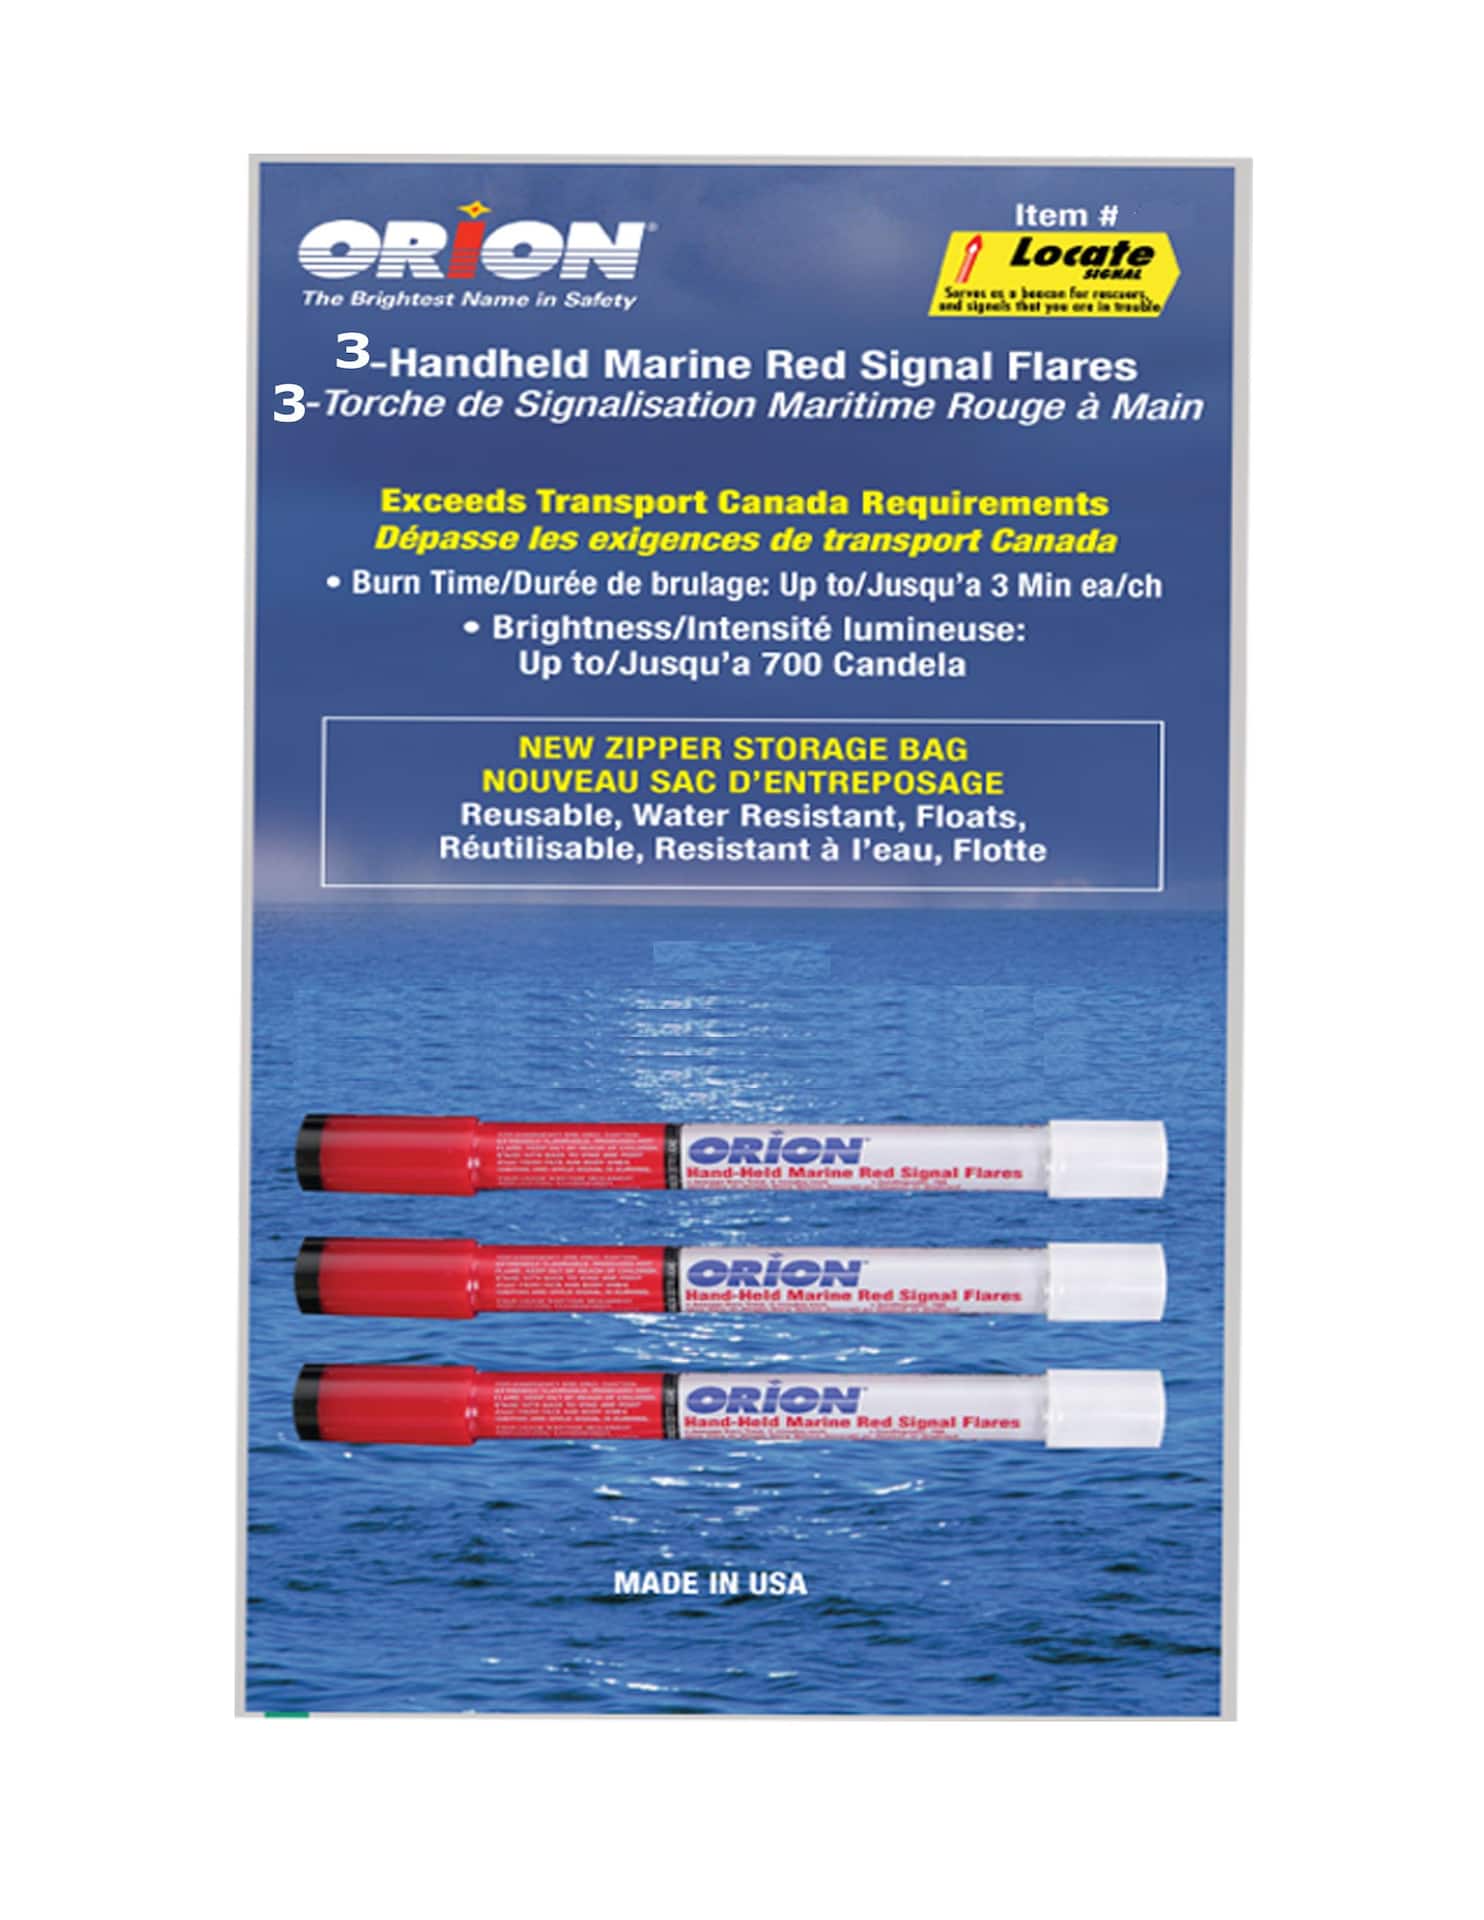 Orion CIL Handheld Marine Aerial / Signal Flares, 4-pk, Red